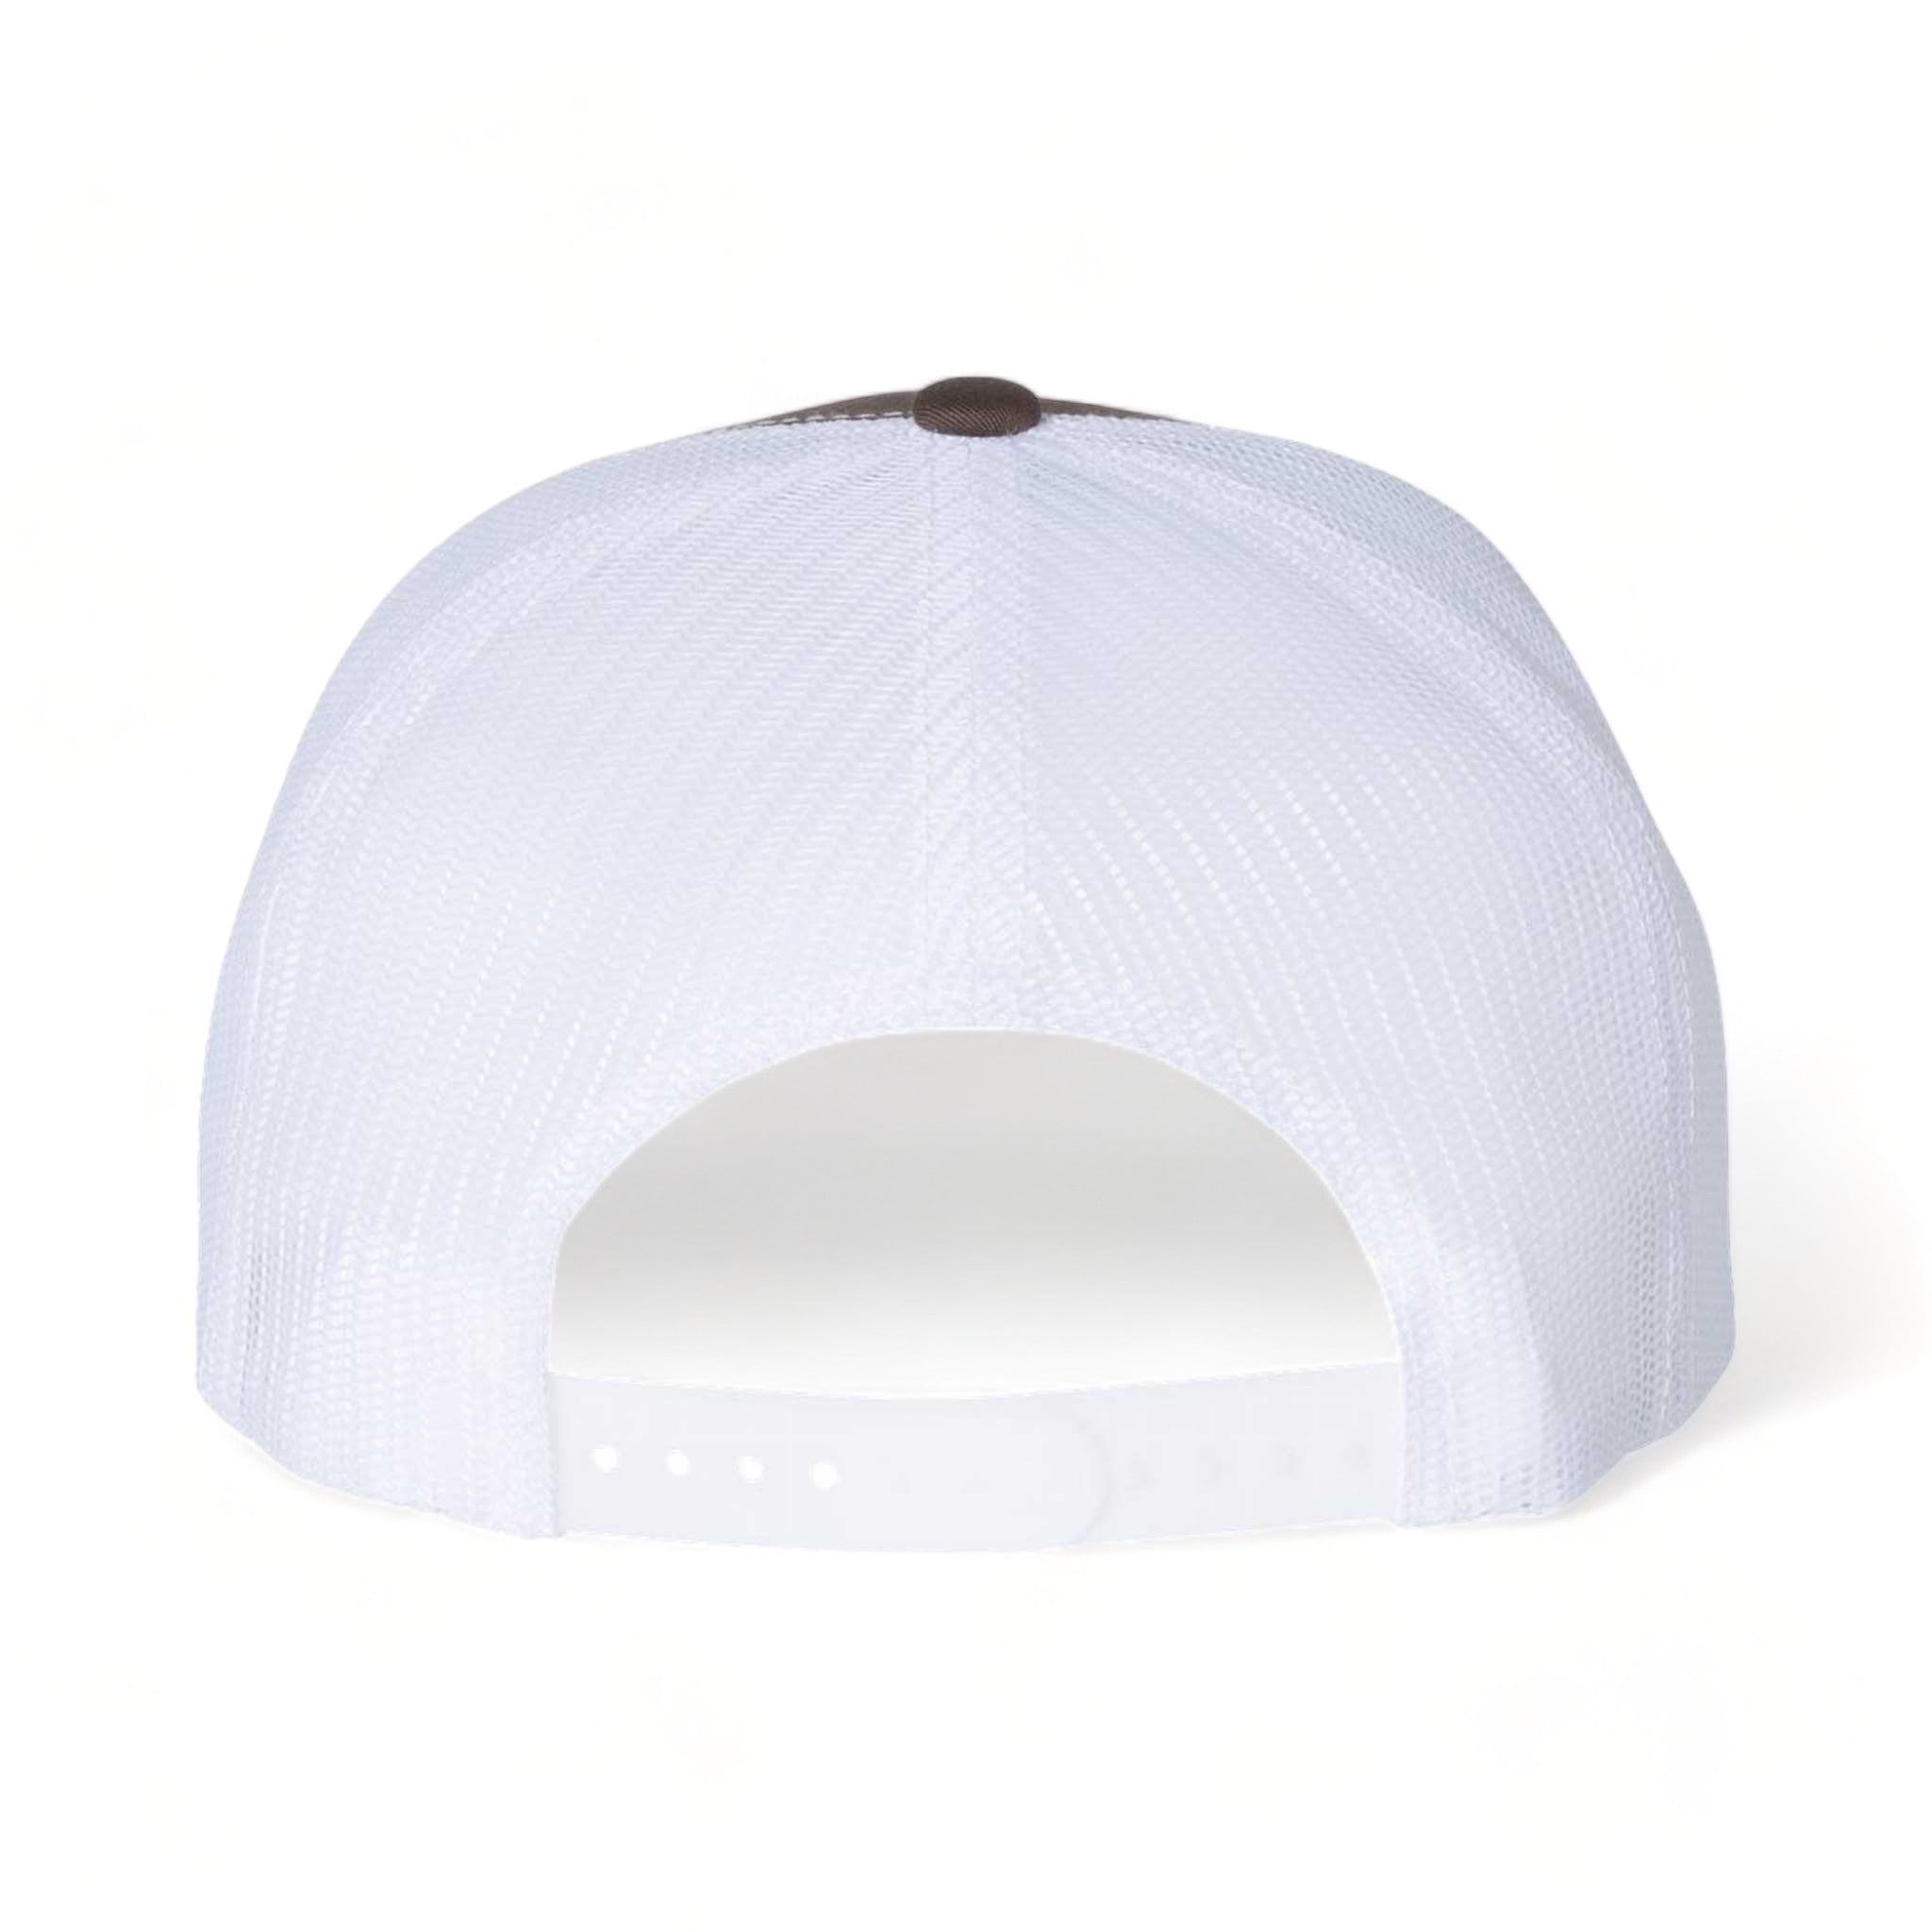 Back view of YP Classics 6006 custom hat in brown and white